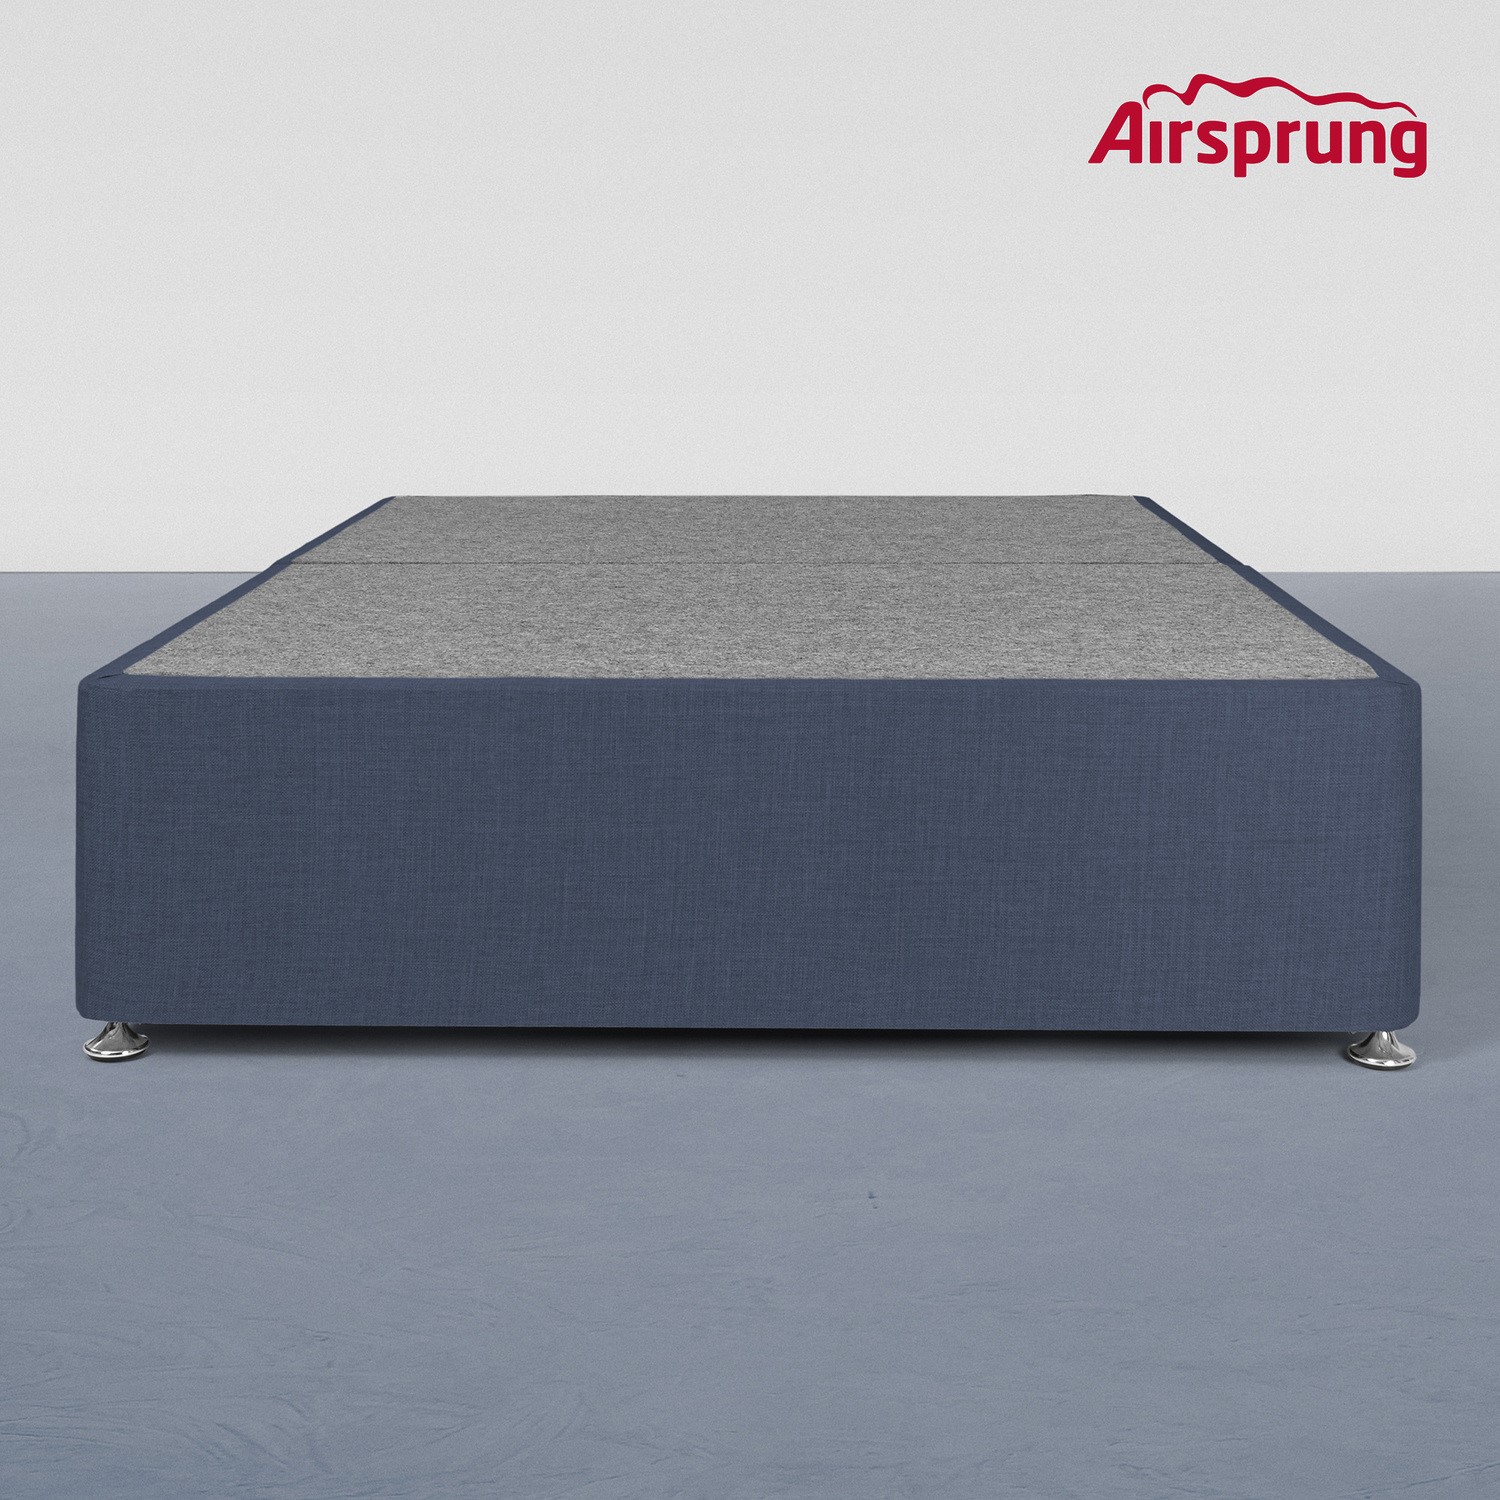 Read more about Airsprung kelston king size 2 drawer divan midnight blue